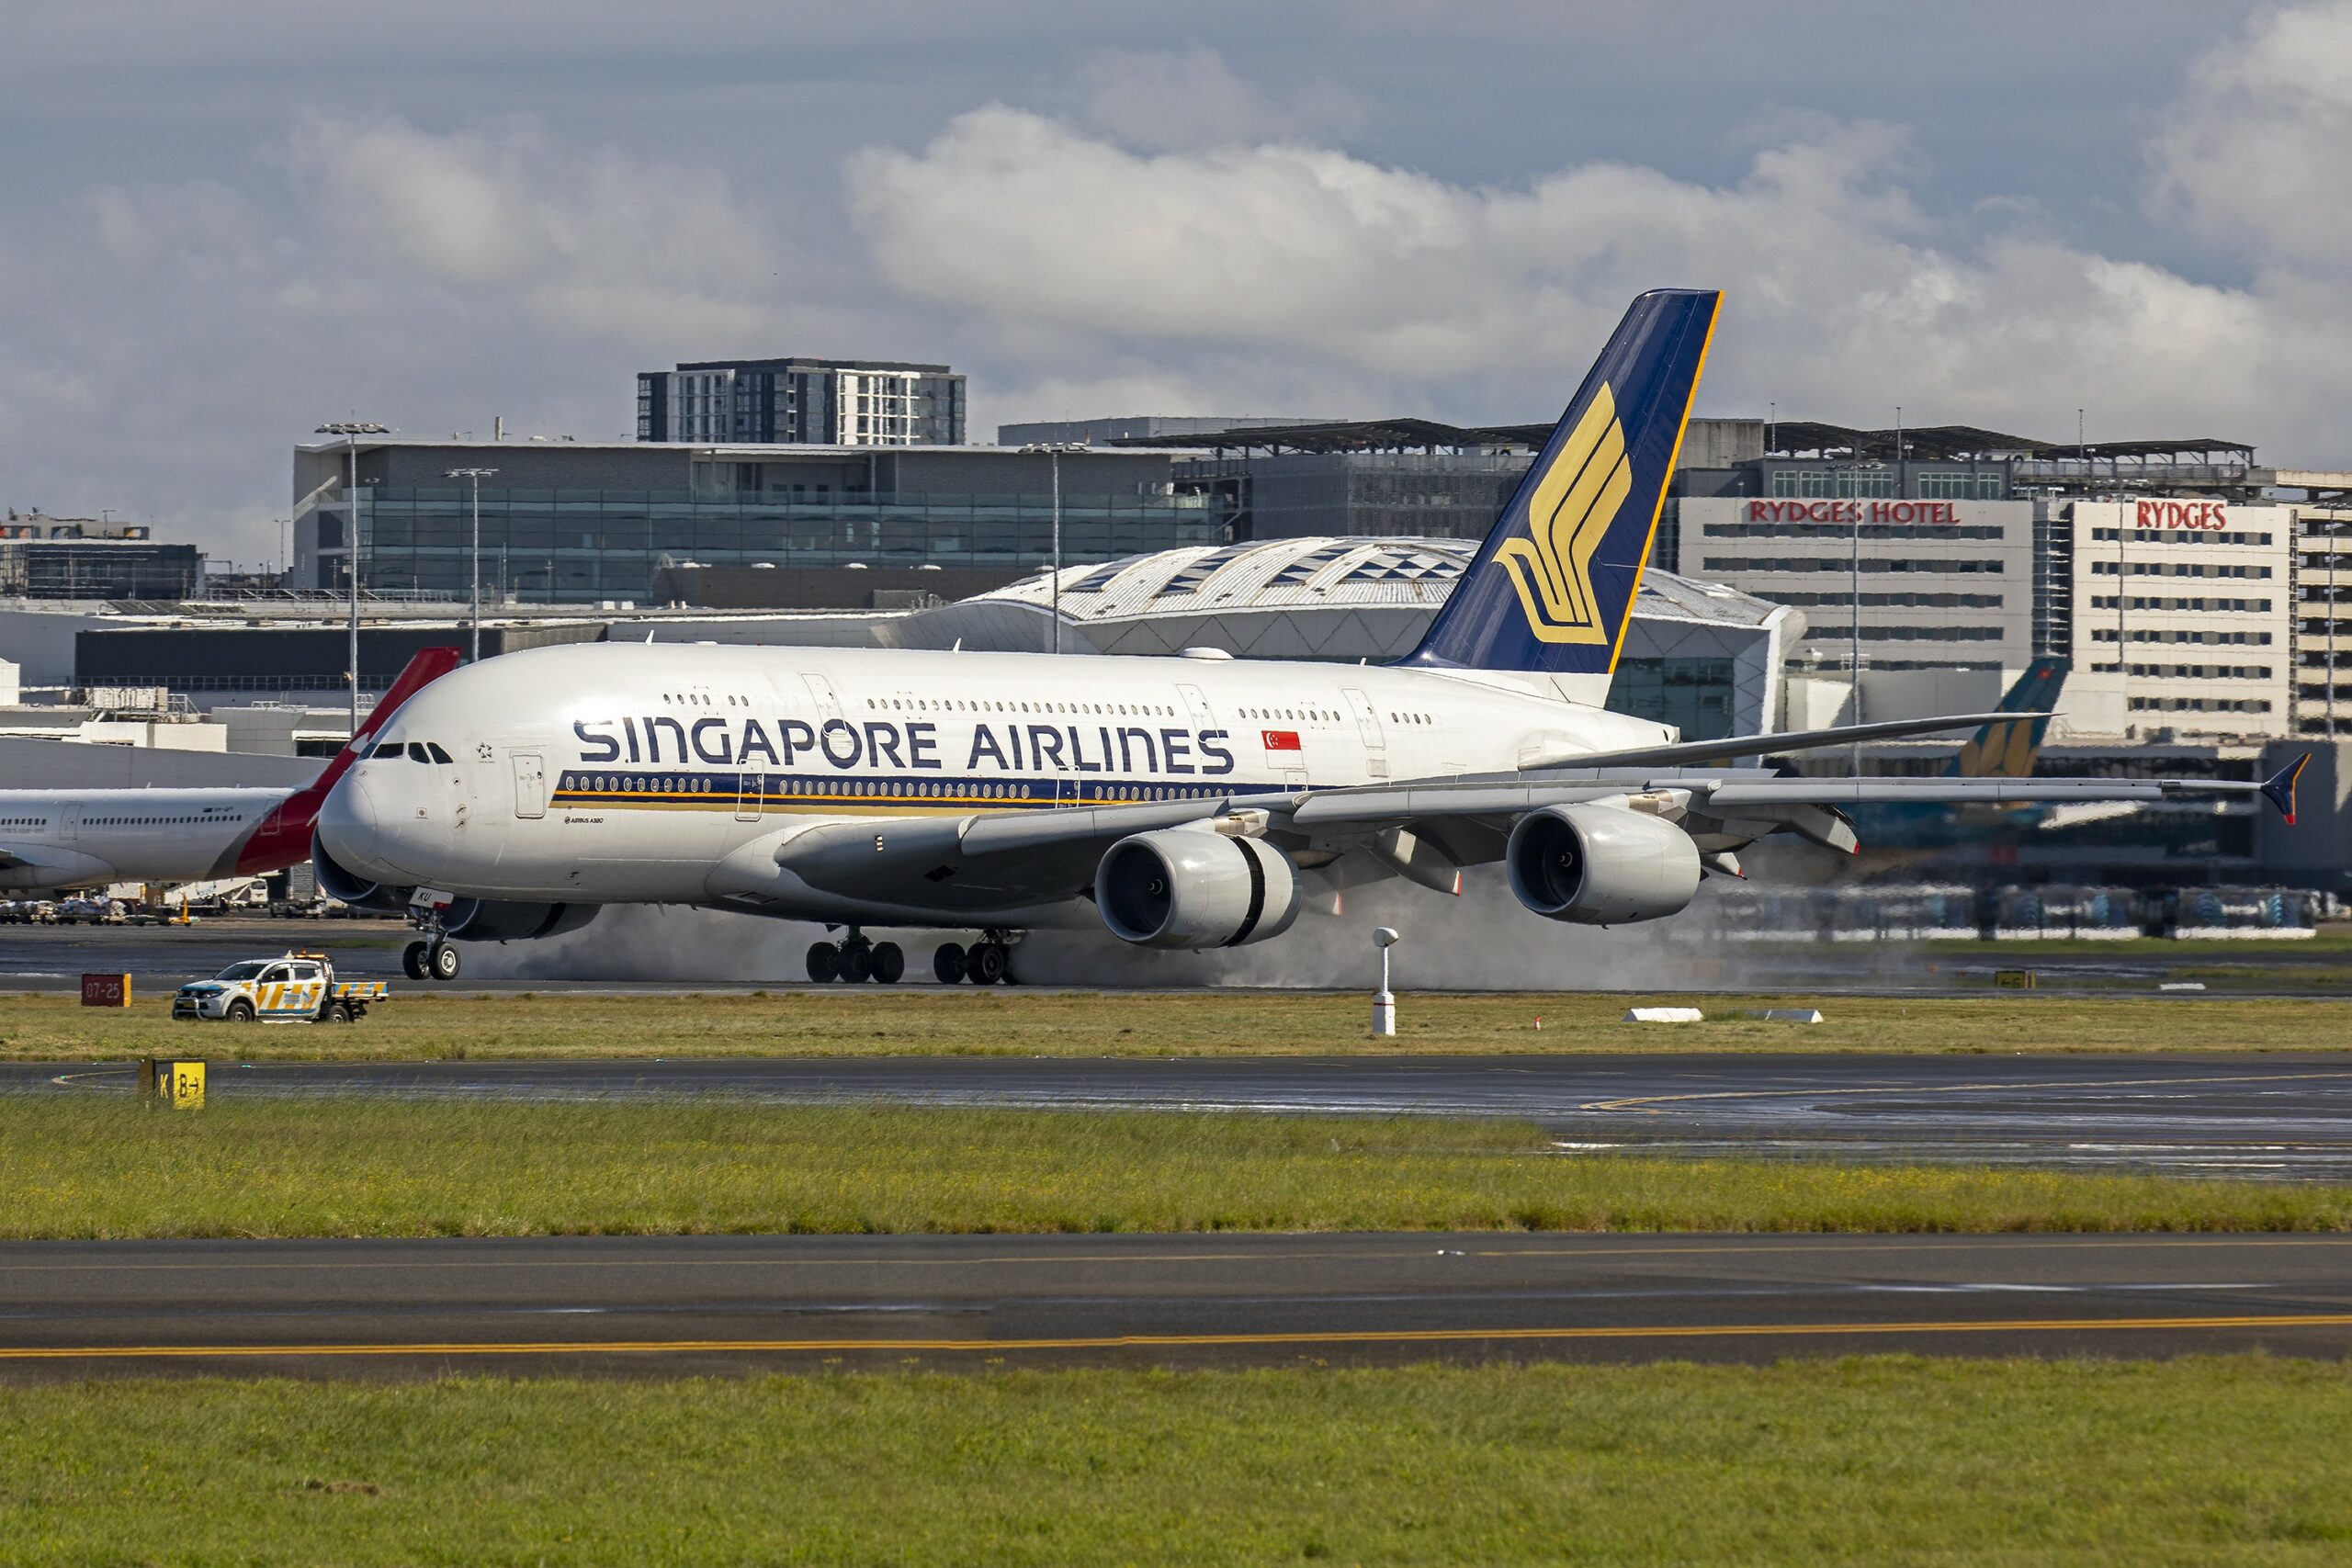 A Singapore Airlines A380 touches down.